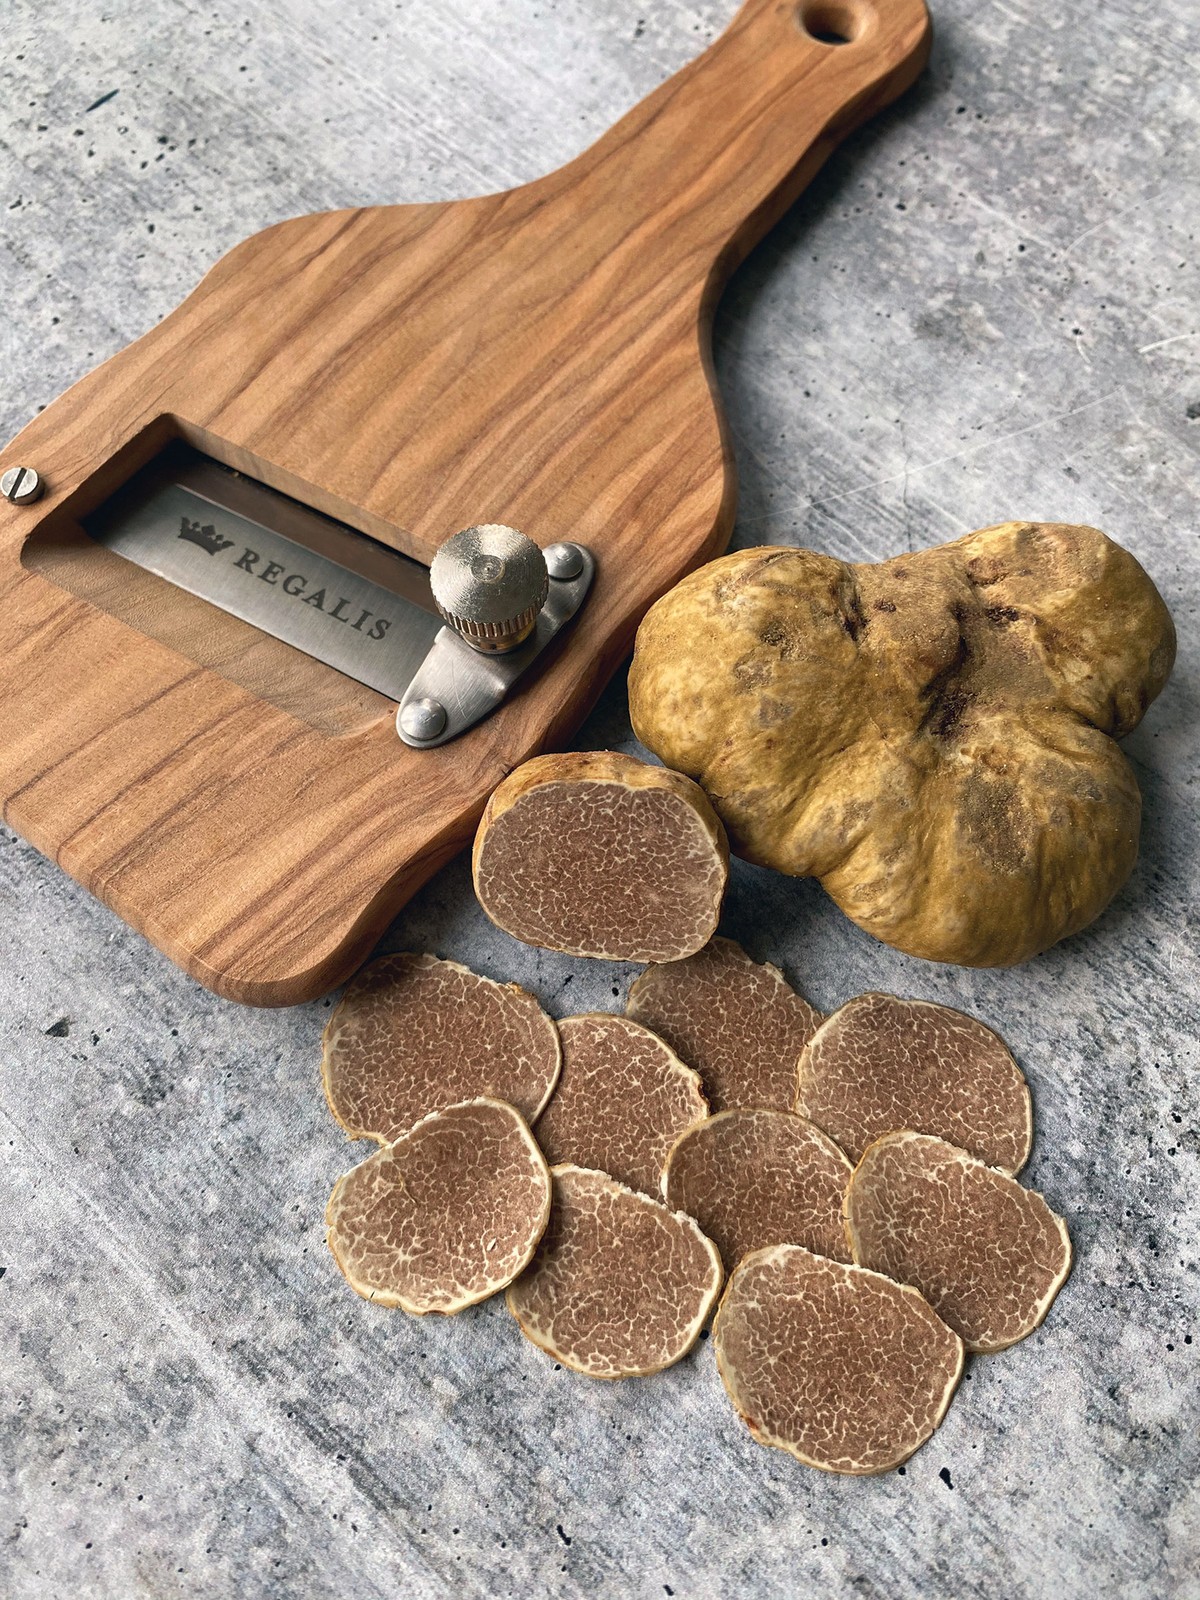 The white truffle,are the most valuable types of truffles on the market.white ones have a nutty sweetness and garlicky funk.